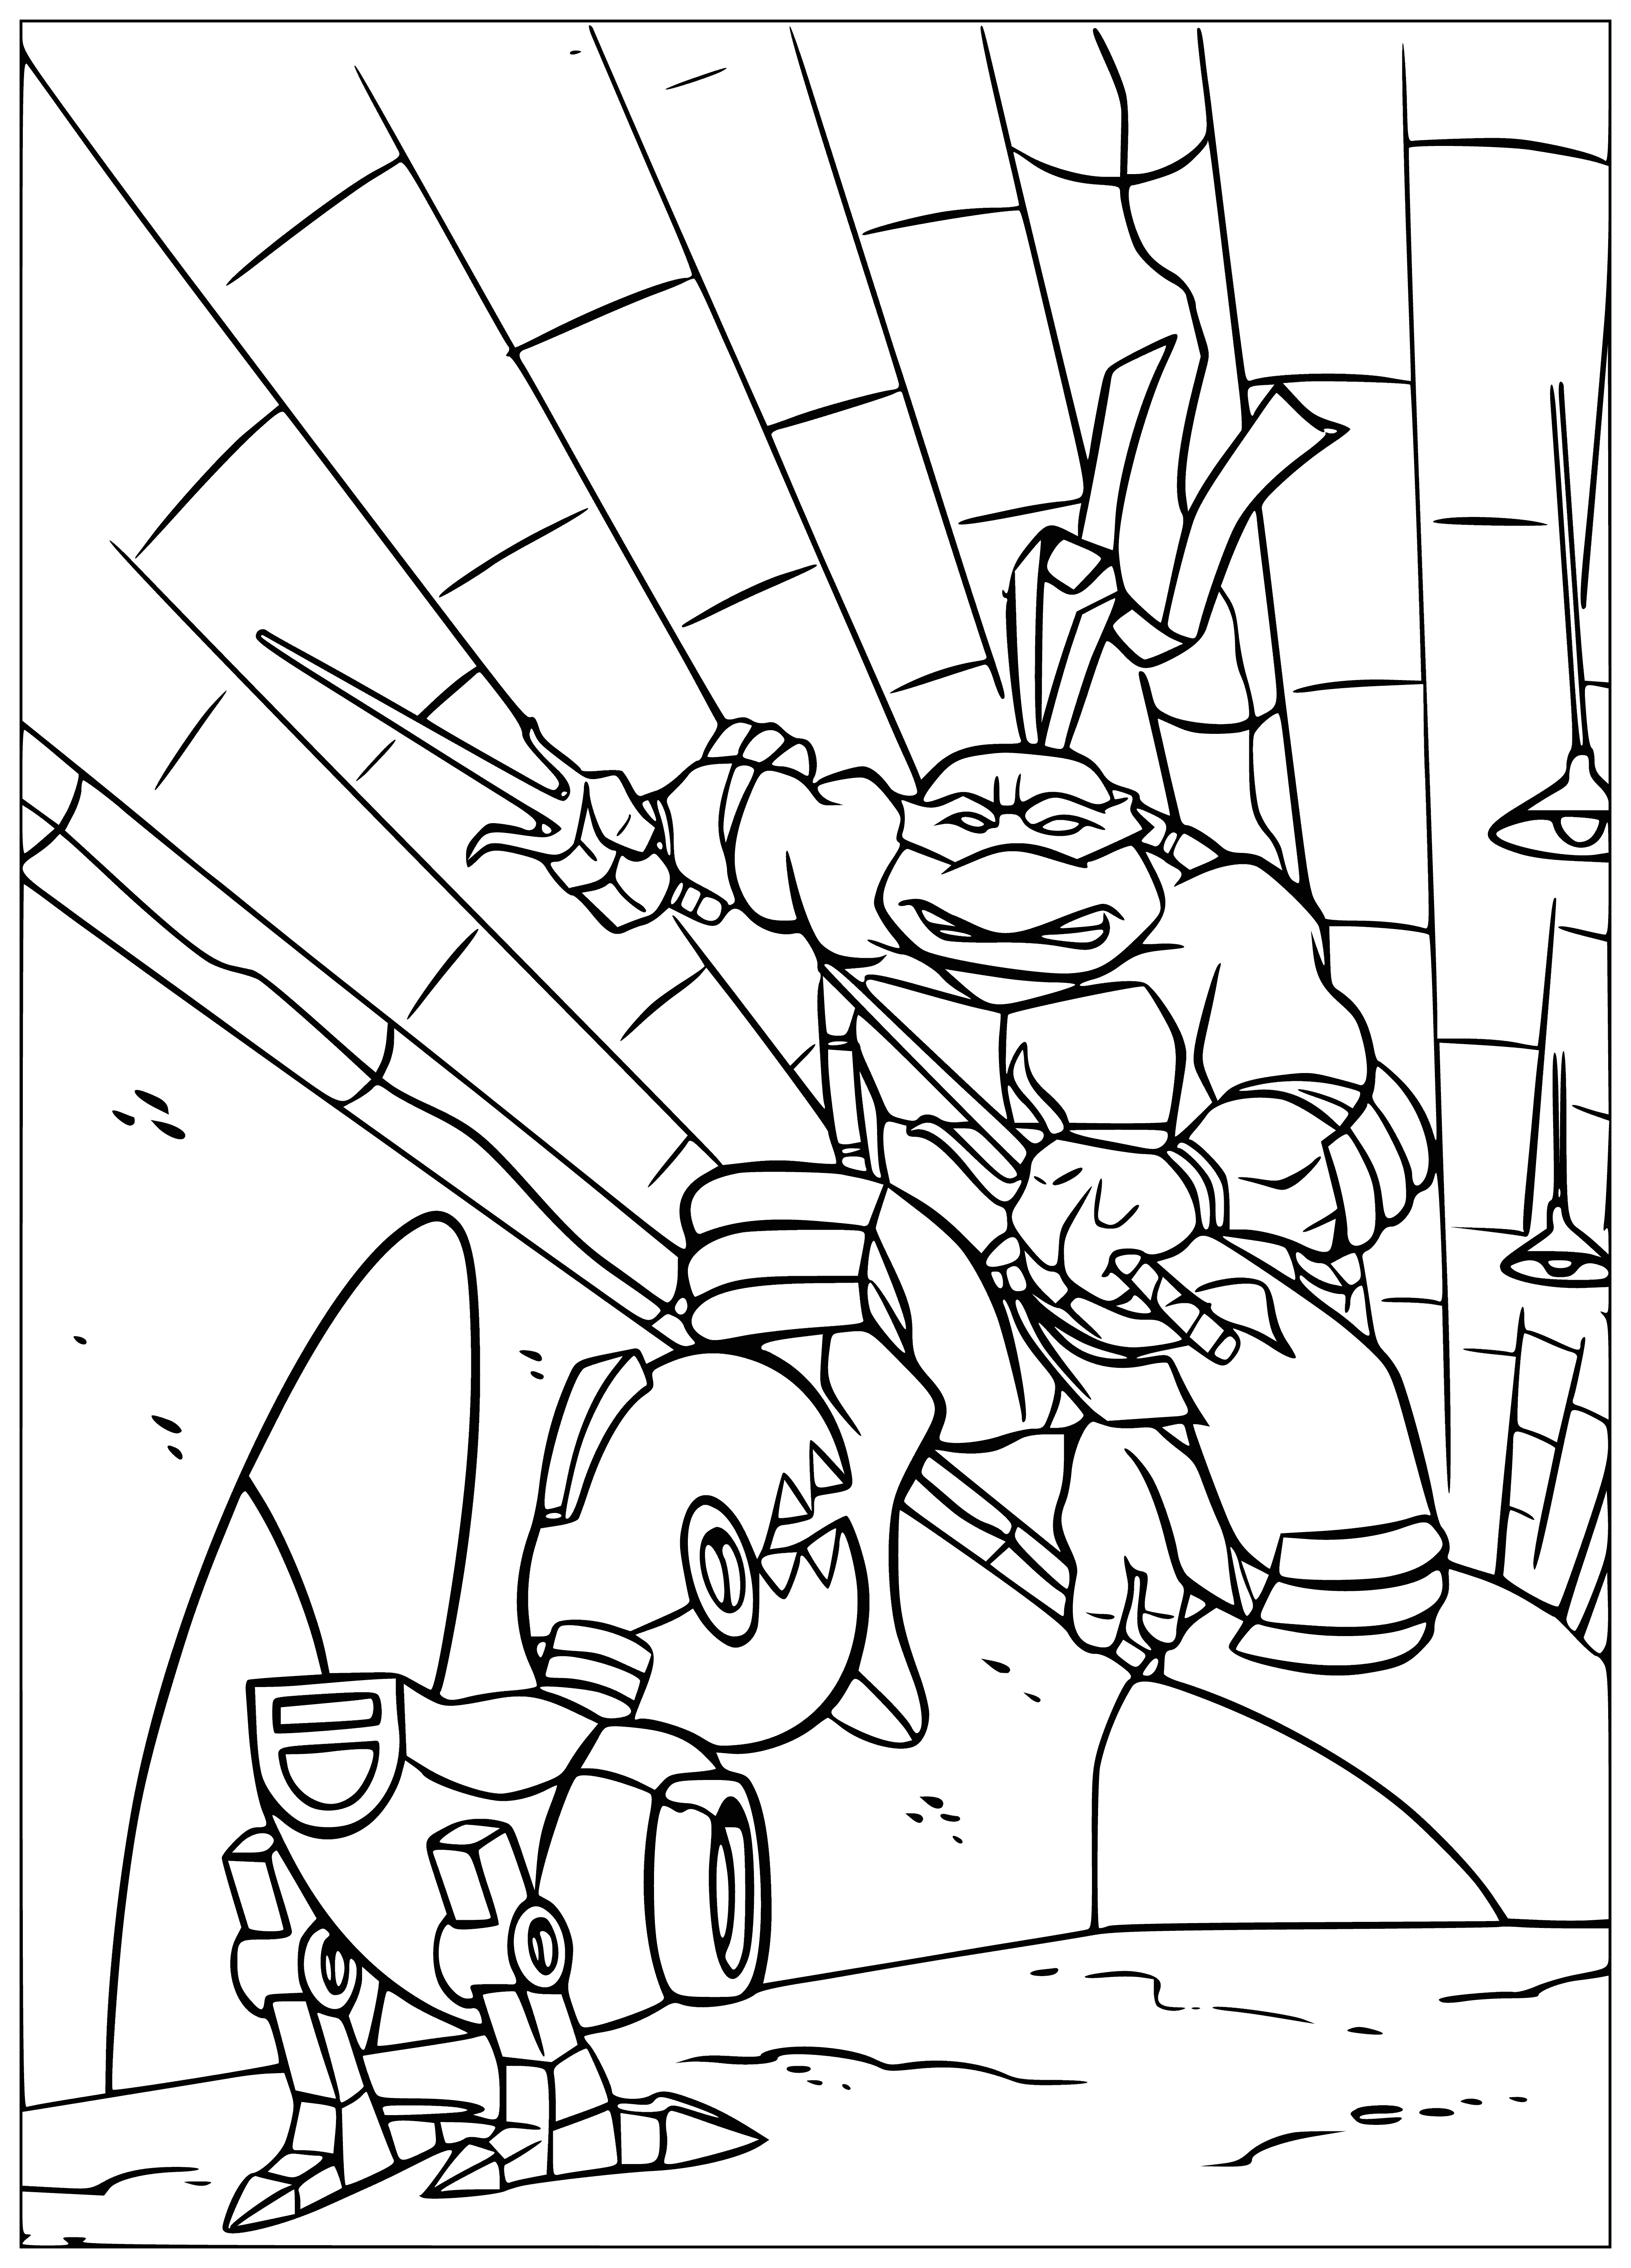 coloring page: Raphael is a cool ninja turtle who stands up for his beliefs and will protect his friends/family. He clashes with his brother Leonardo and takes on the bad guys. He's named after the Italian painter Raphael. #TeenageMutantNinjaTurtles